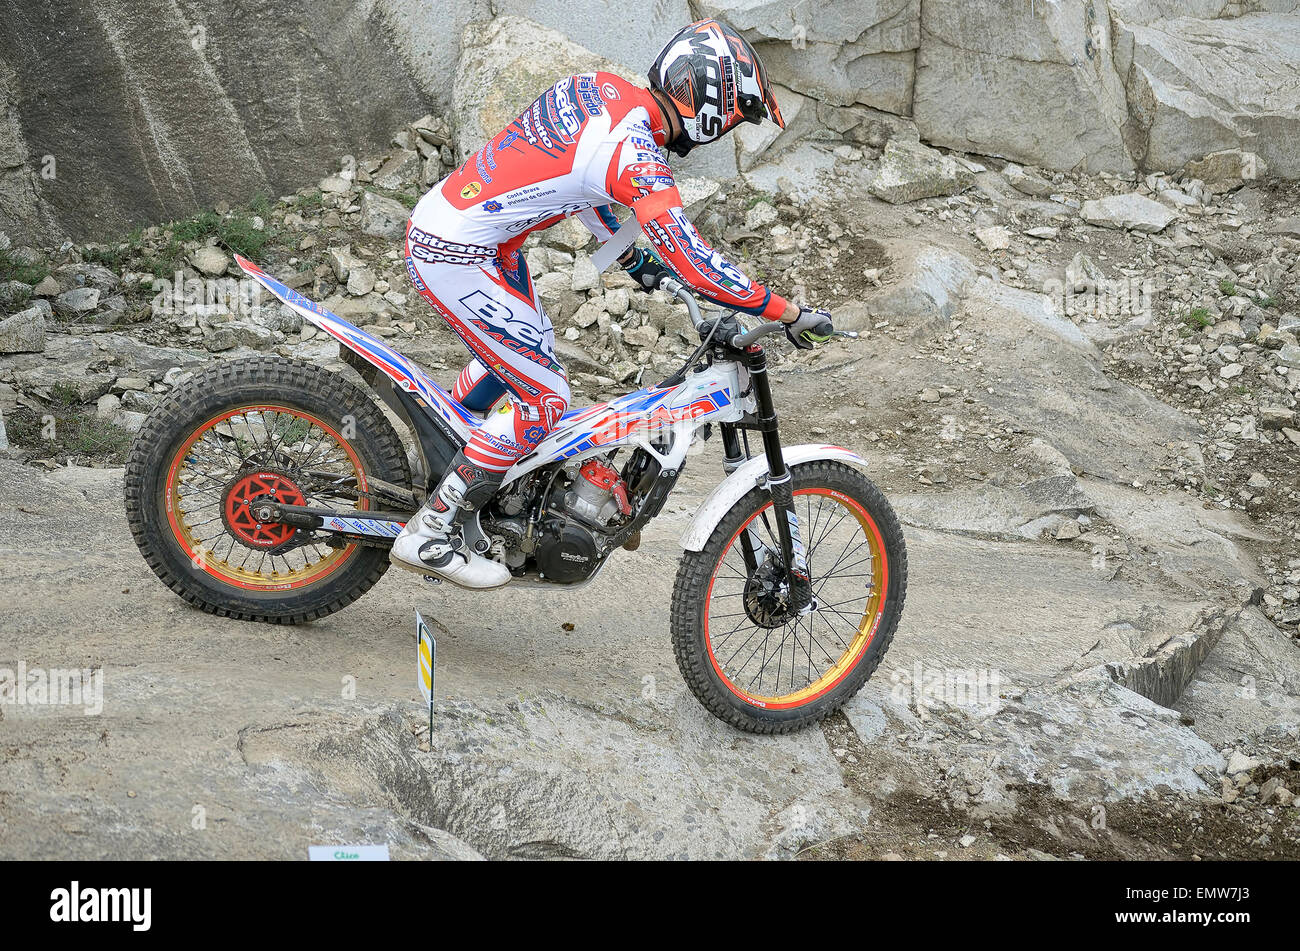 Spain trial championship. Jeroni Fajardo drives his motorcycle over granite rocks. He finished in 2nd position (TR1). Stock Photo